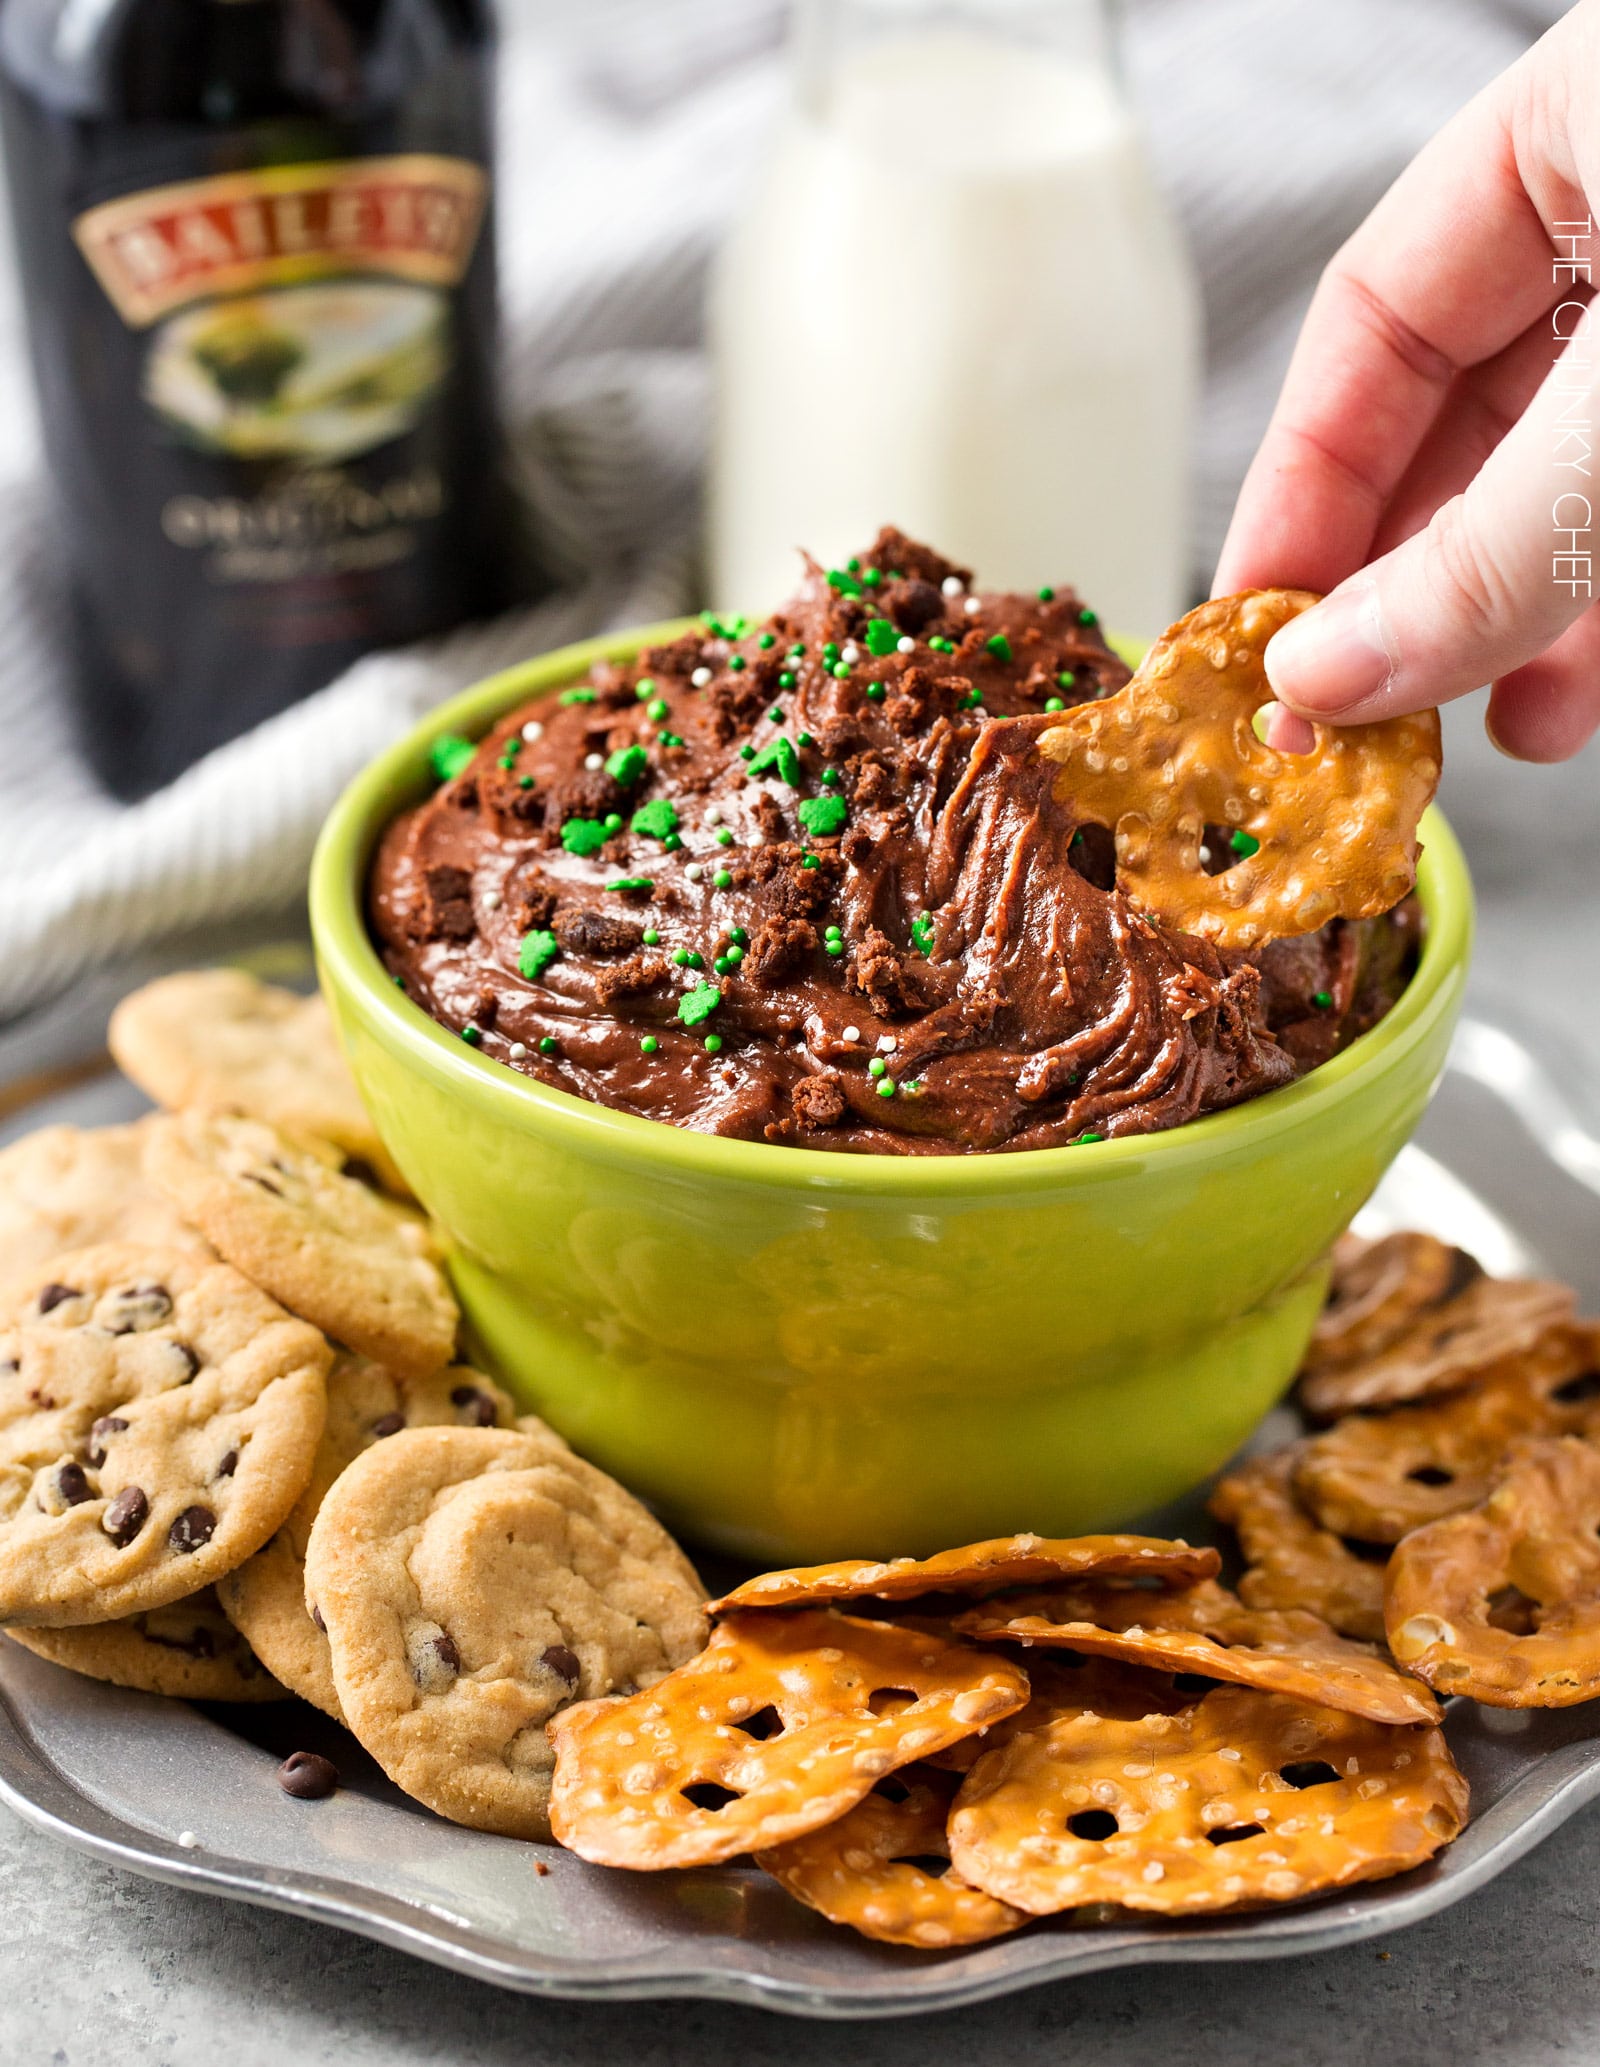 Baileys Brownie Batter Dip | All the amazing brownie batter flavor, in a safe to eat, eggless dip. A splash of Baileys gives this dessert dip a little holiday flair... perfect for a St. Patrick's Day party! | http://thechunkychef.com